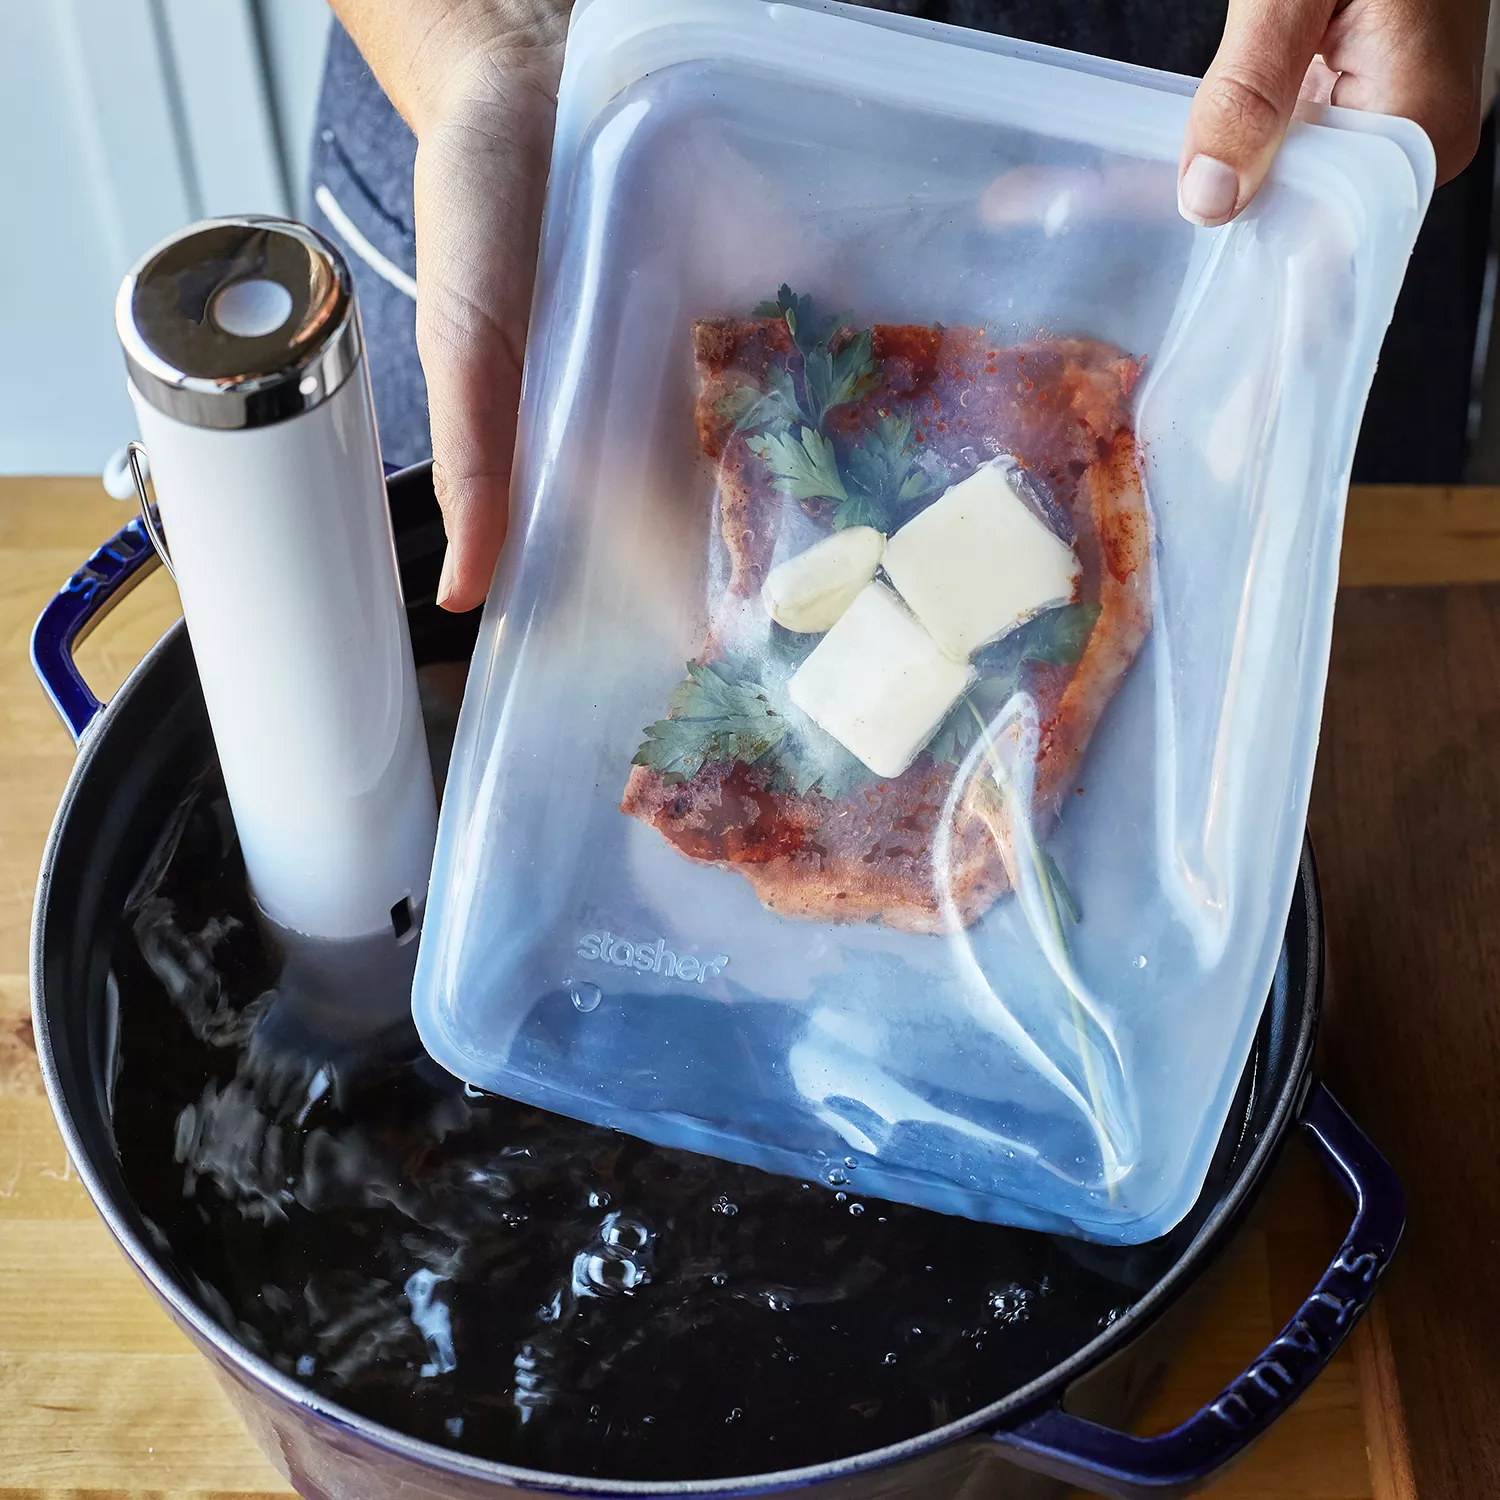 Sous-vide Cooking and storing bags